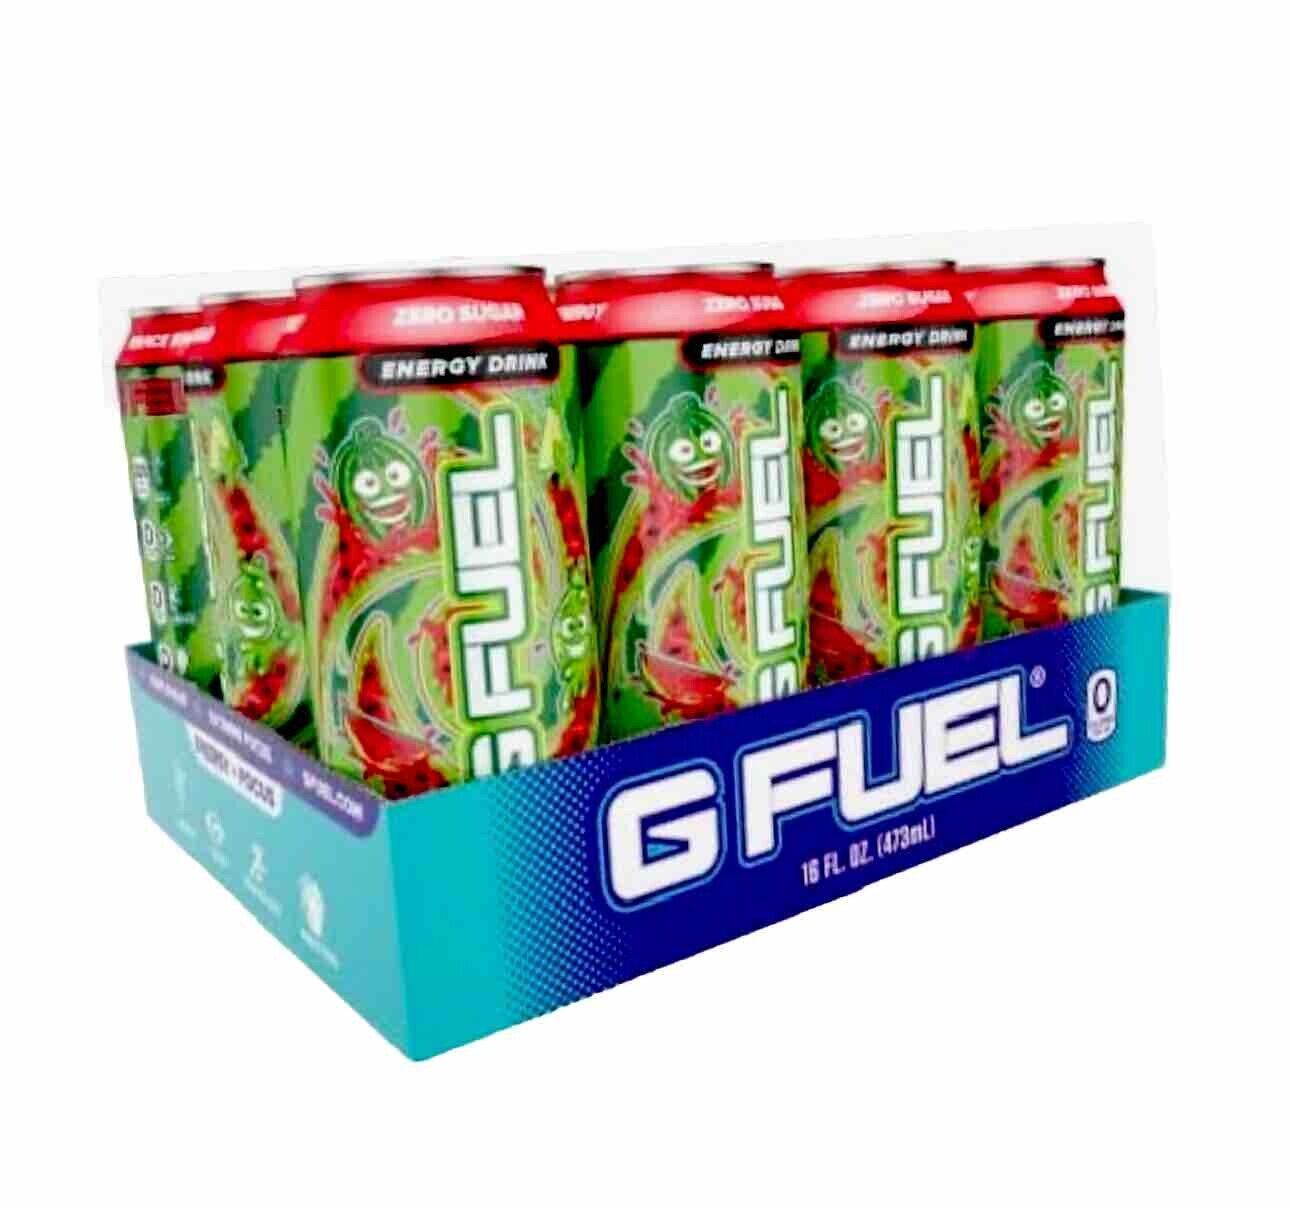 G FUEL Energy Drink 16oz Pack of 12 Watermelon Lime (Buy One Get One FREE DEAL)